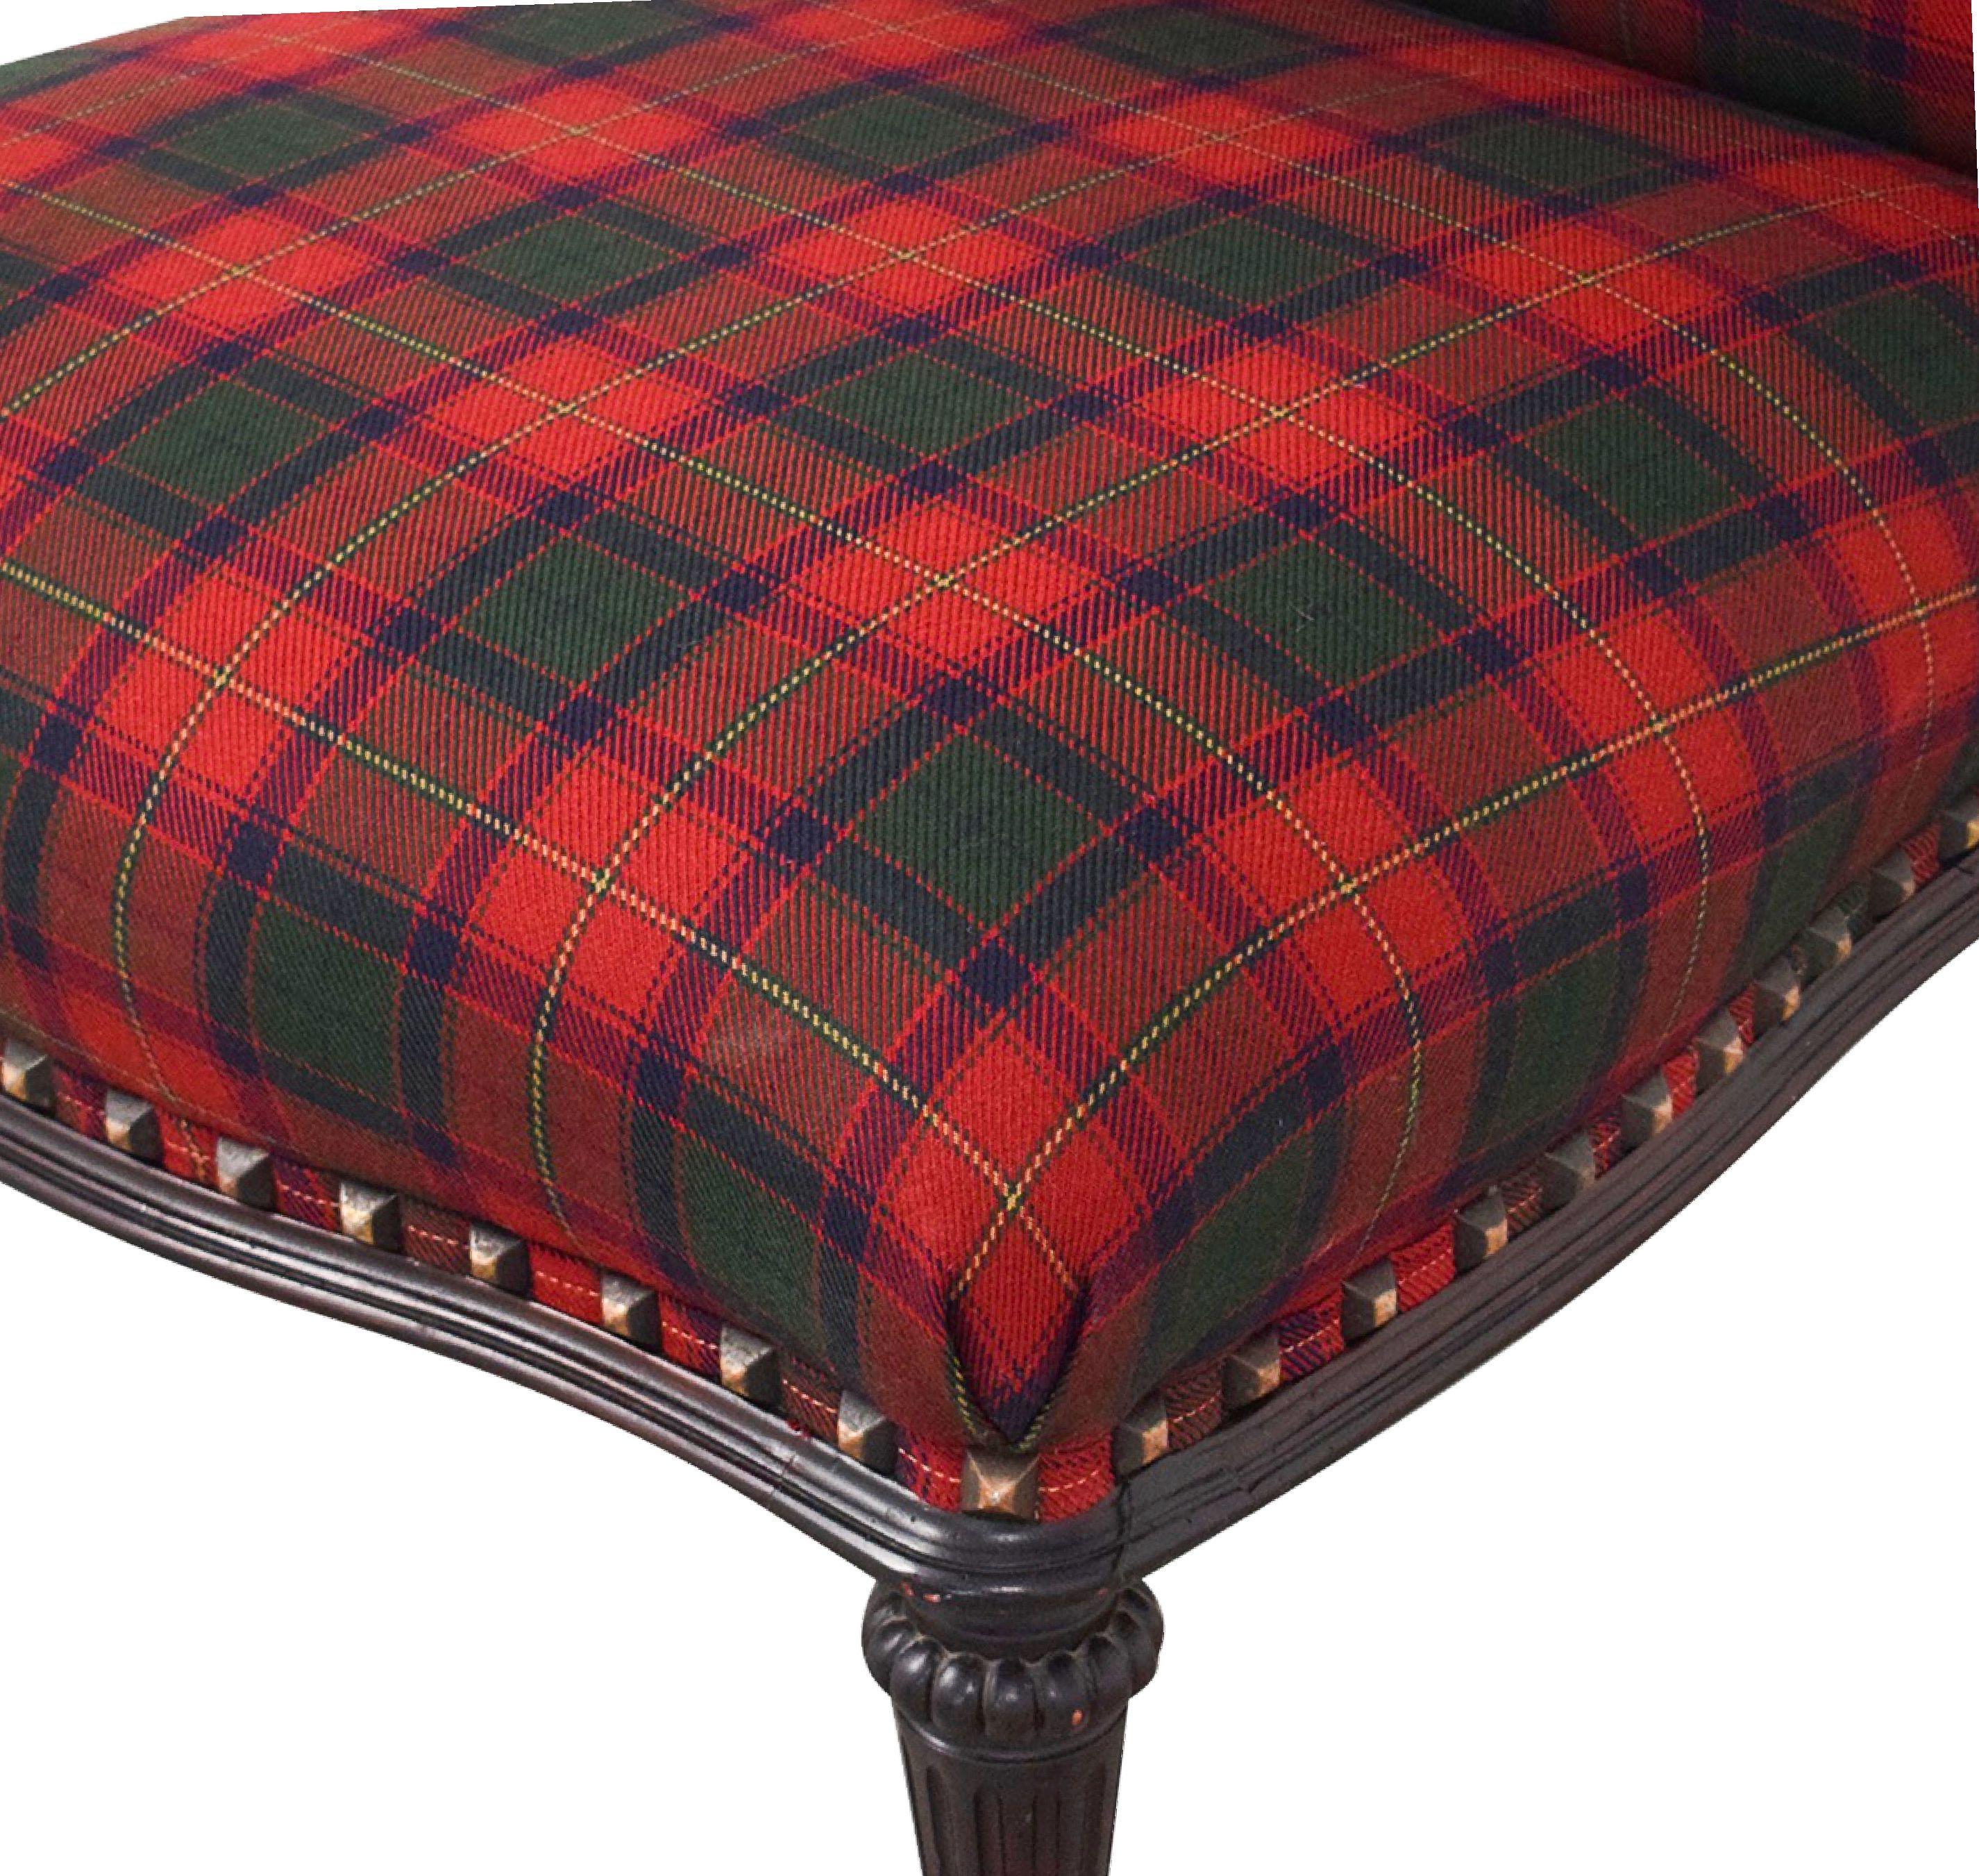 Neoclassical Revival Ralph Lauren Round-Back Slipper Chair, Mahogany Bade, Antiqued Brass, Red Plaid